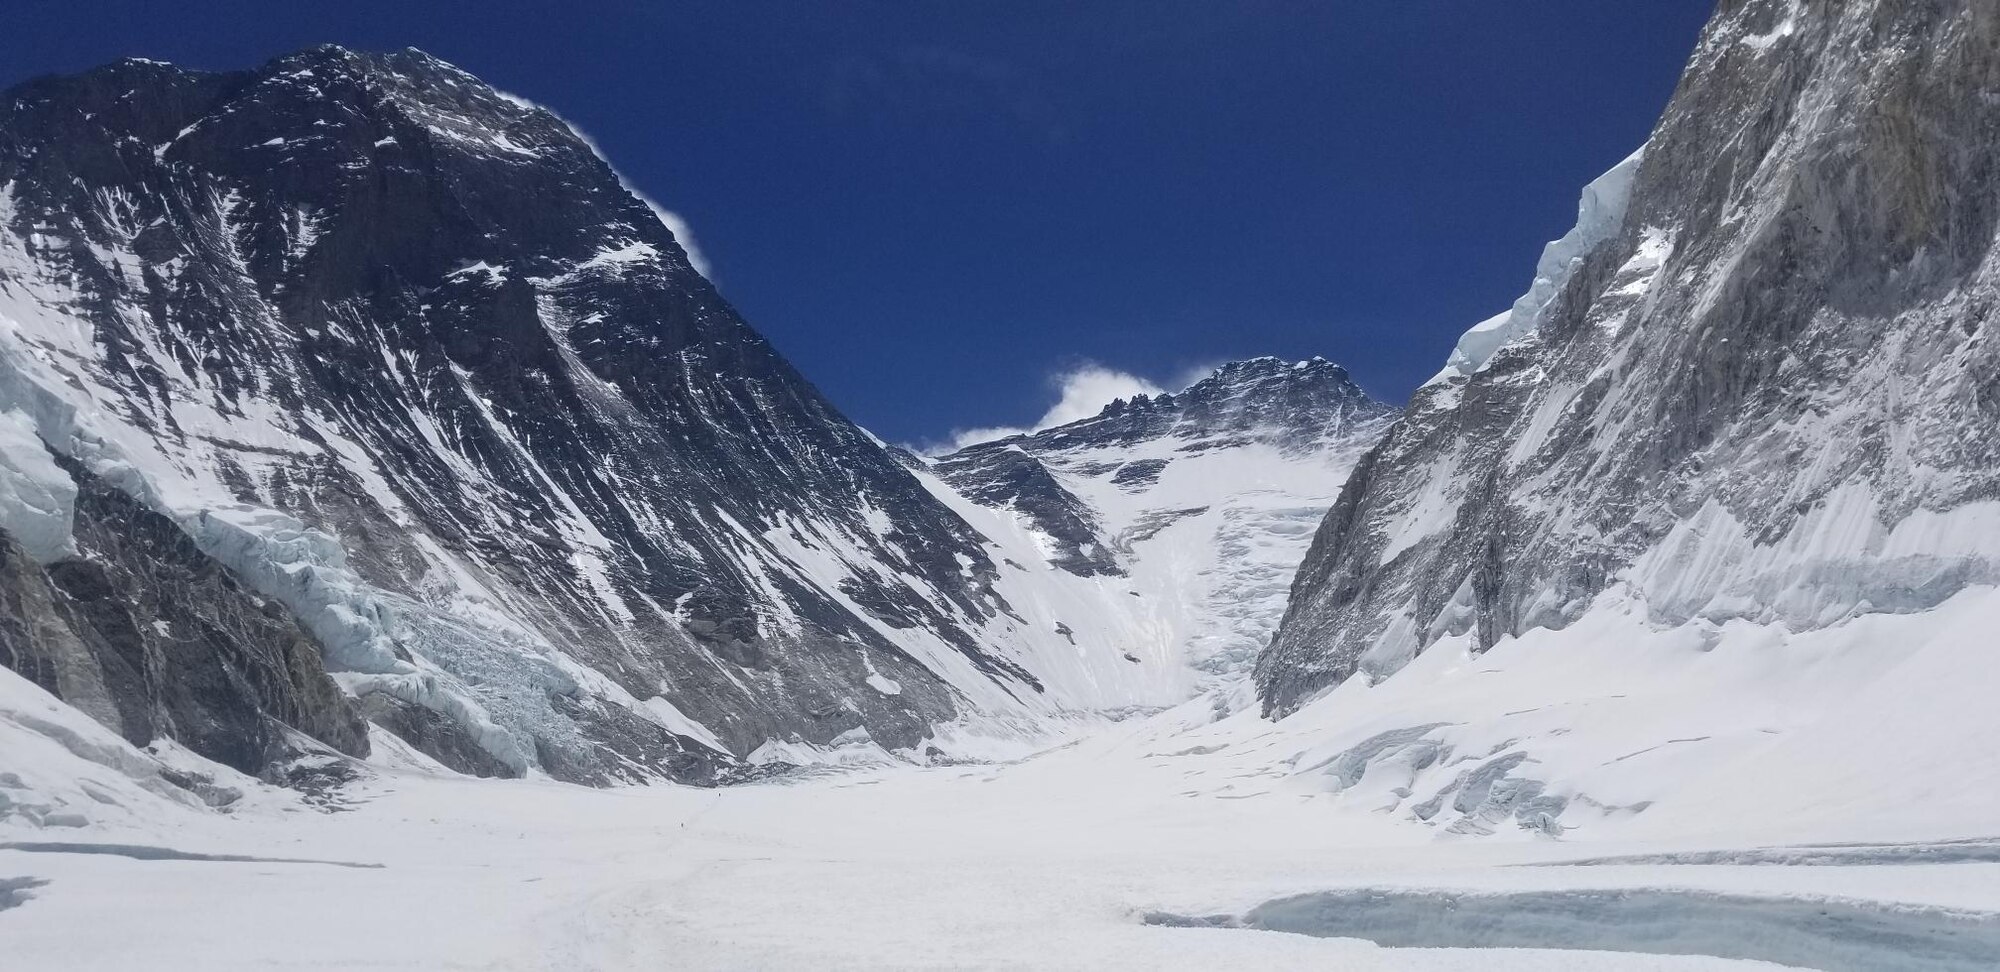 A photo  from the top of Mount Everest, May 23, 2019.  The photo was taken by Tech. Sgt. Daniel Wehrly, 931st Maintenance Squadron Technology craftsman, who summited Mount Everest with the help two friends and seven local Sherpas.  The journey took more than two months.